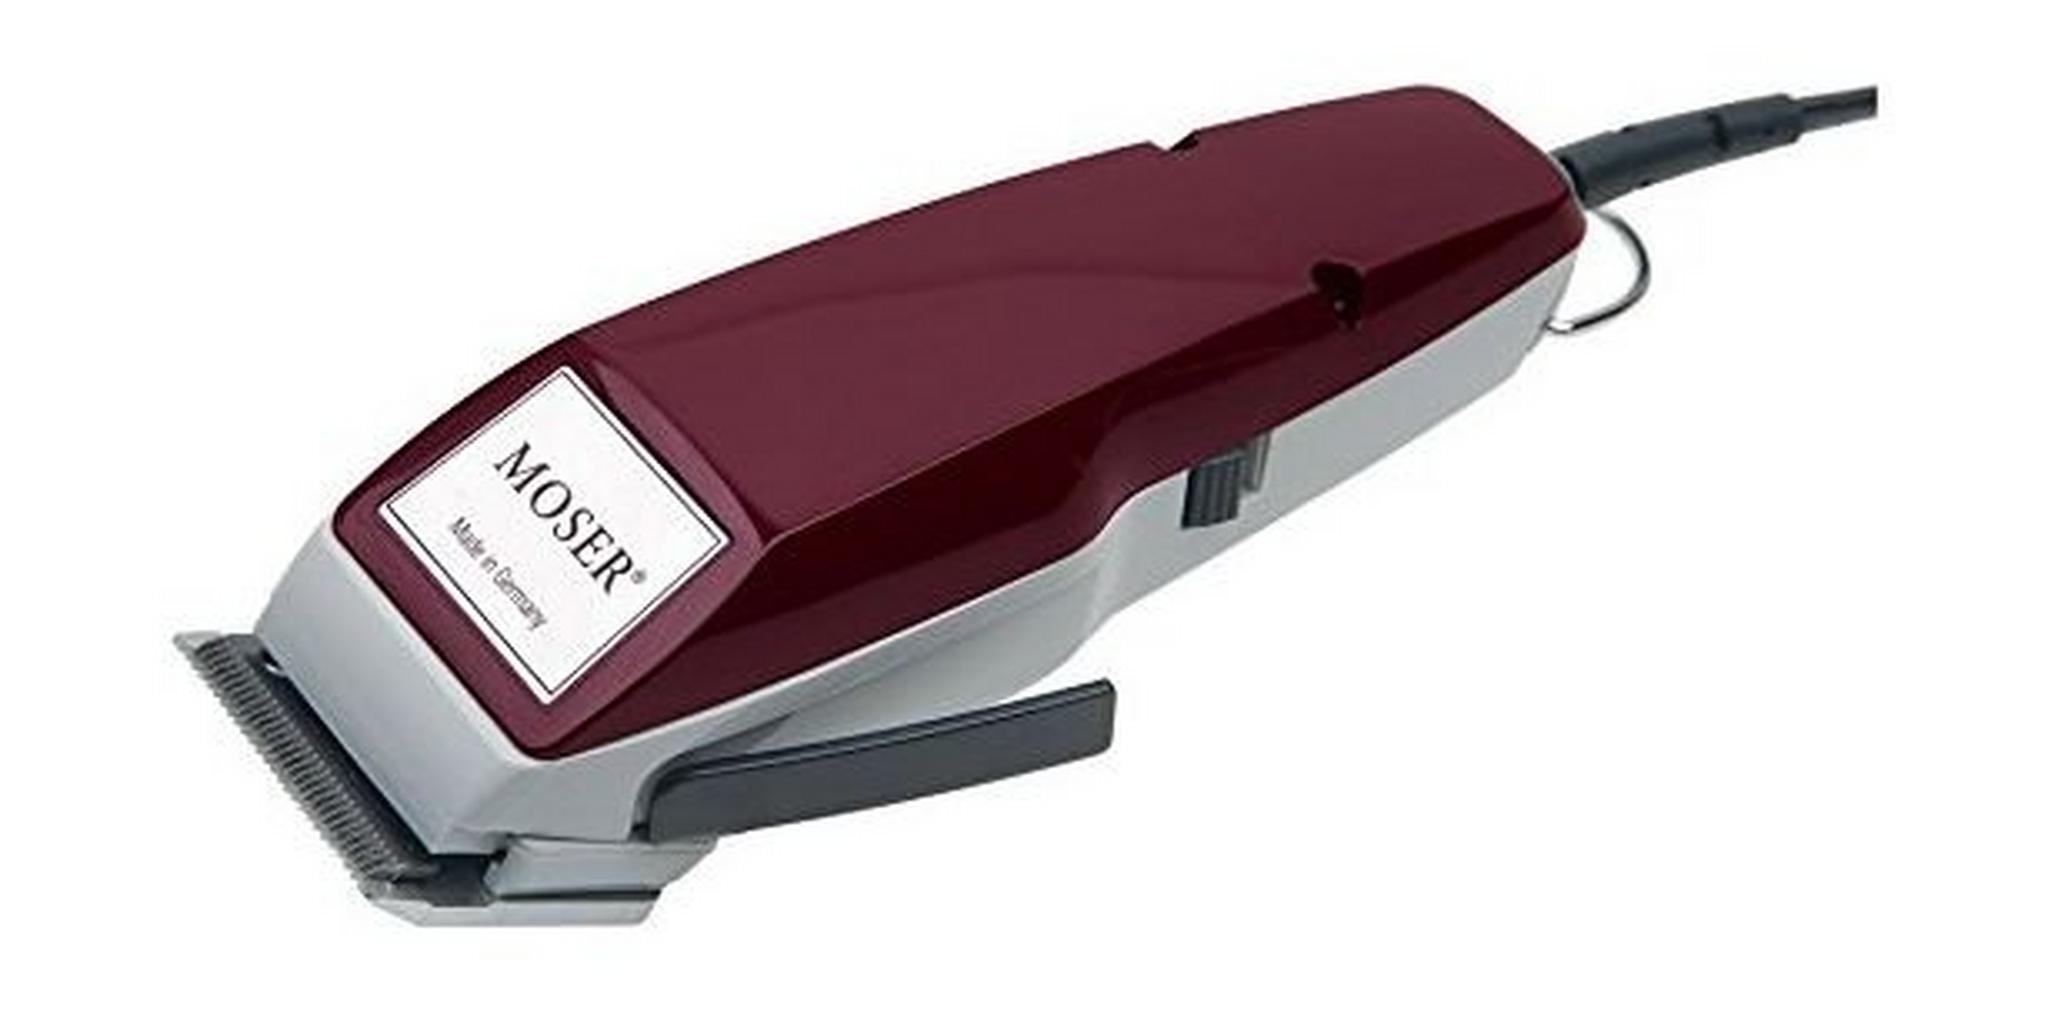 Moser Classic Professional Hair Clipper & Trimmer, 1400-0050 - Red